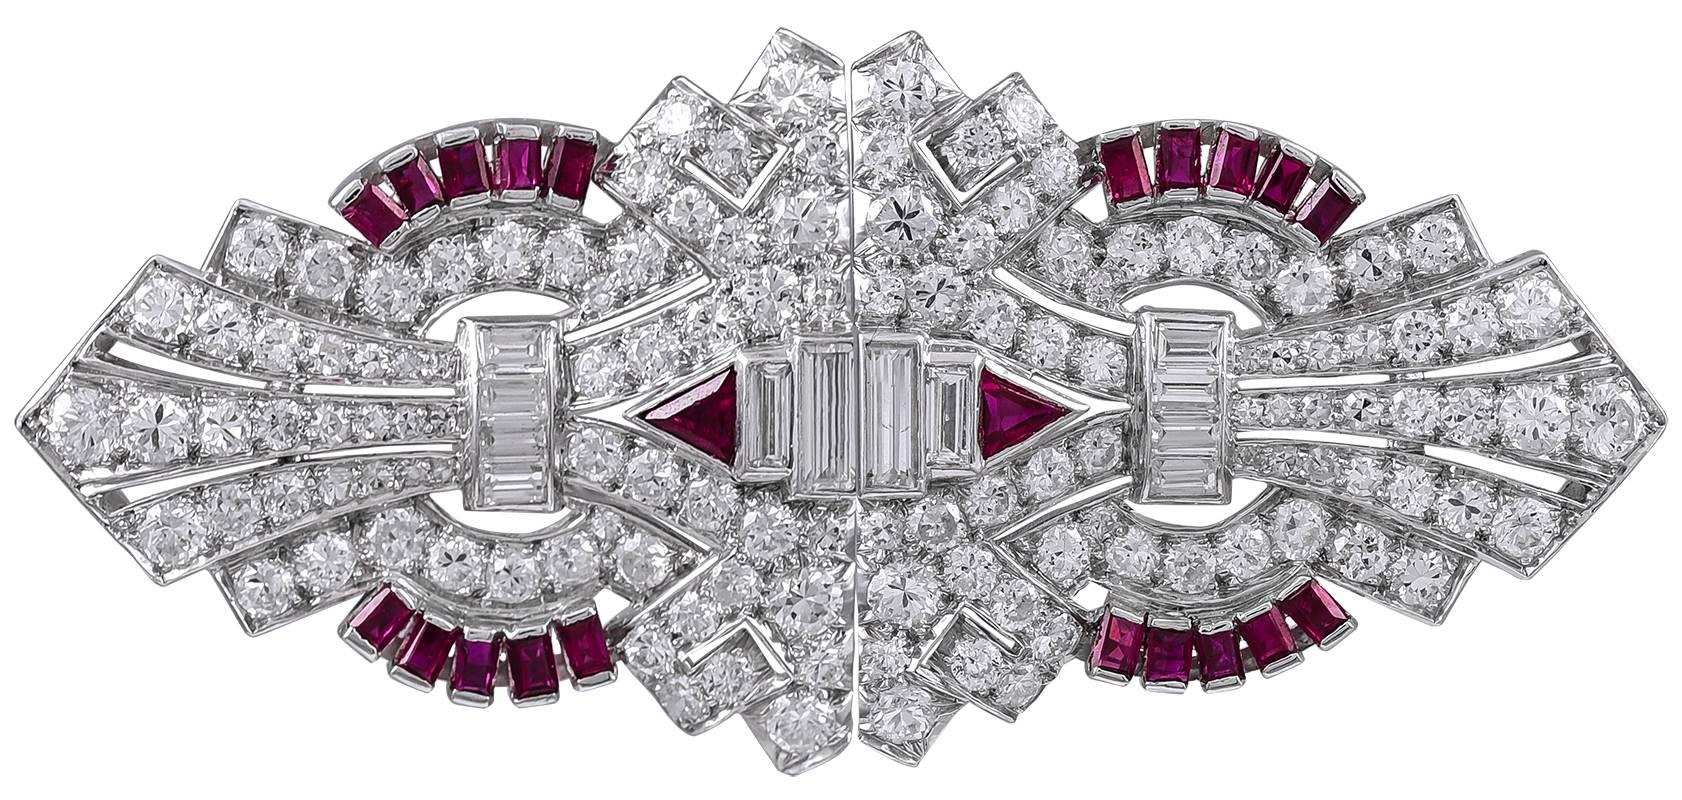 Of classic geometric Art Deco design, the ruby (approximately 1 carat) and diamond (approximately 4 carats) dress clips mounted in platinum, featuring triangular, baguette and circular-cut stones, measuring approximately 1 1/4 inches long each or 2